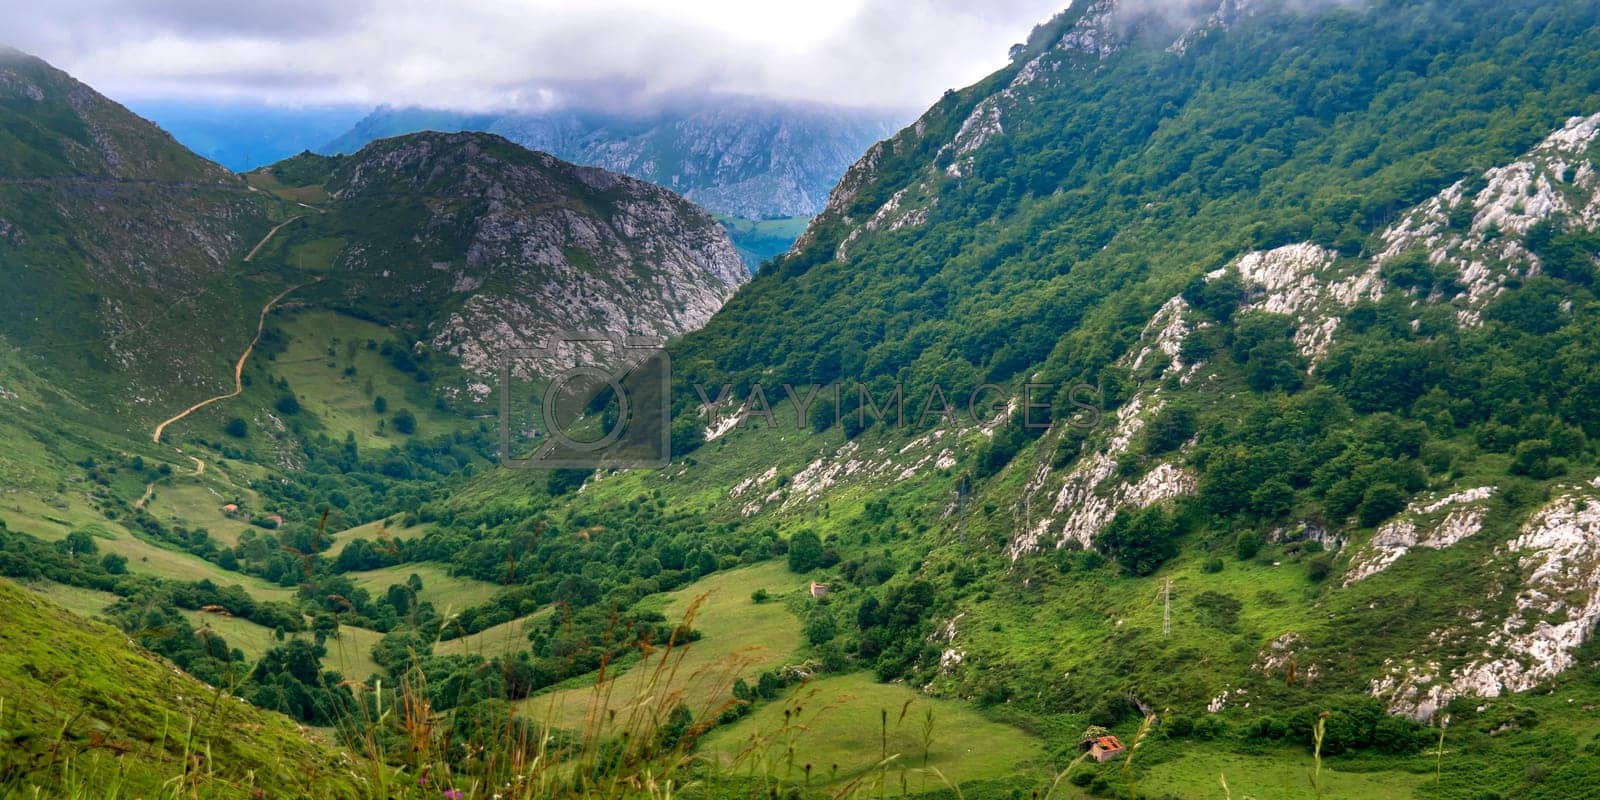 Royalty free image of Peaks of Central Massif, Picos de Europa National Park, Spain by alcaproac